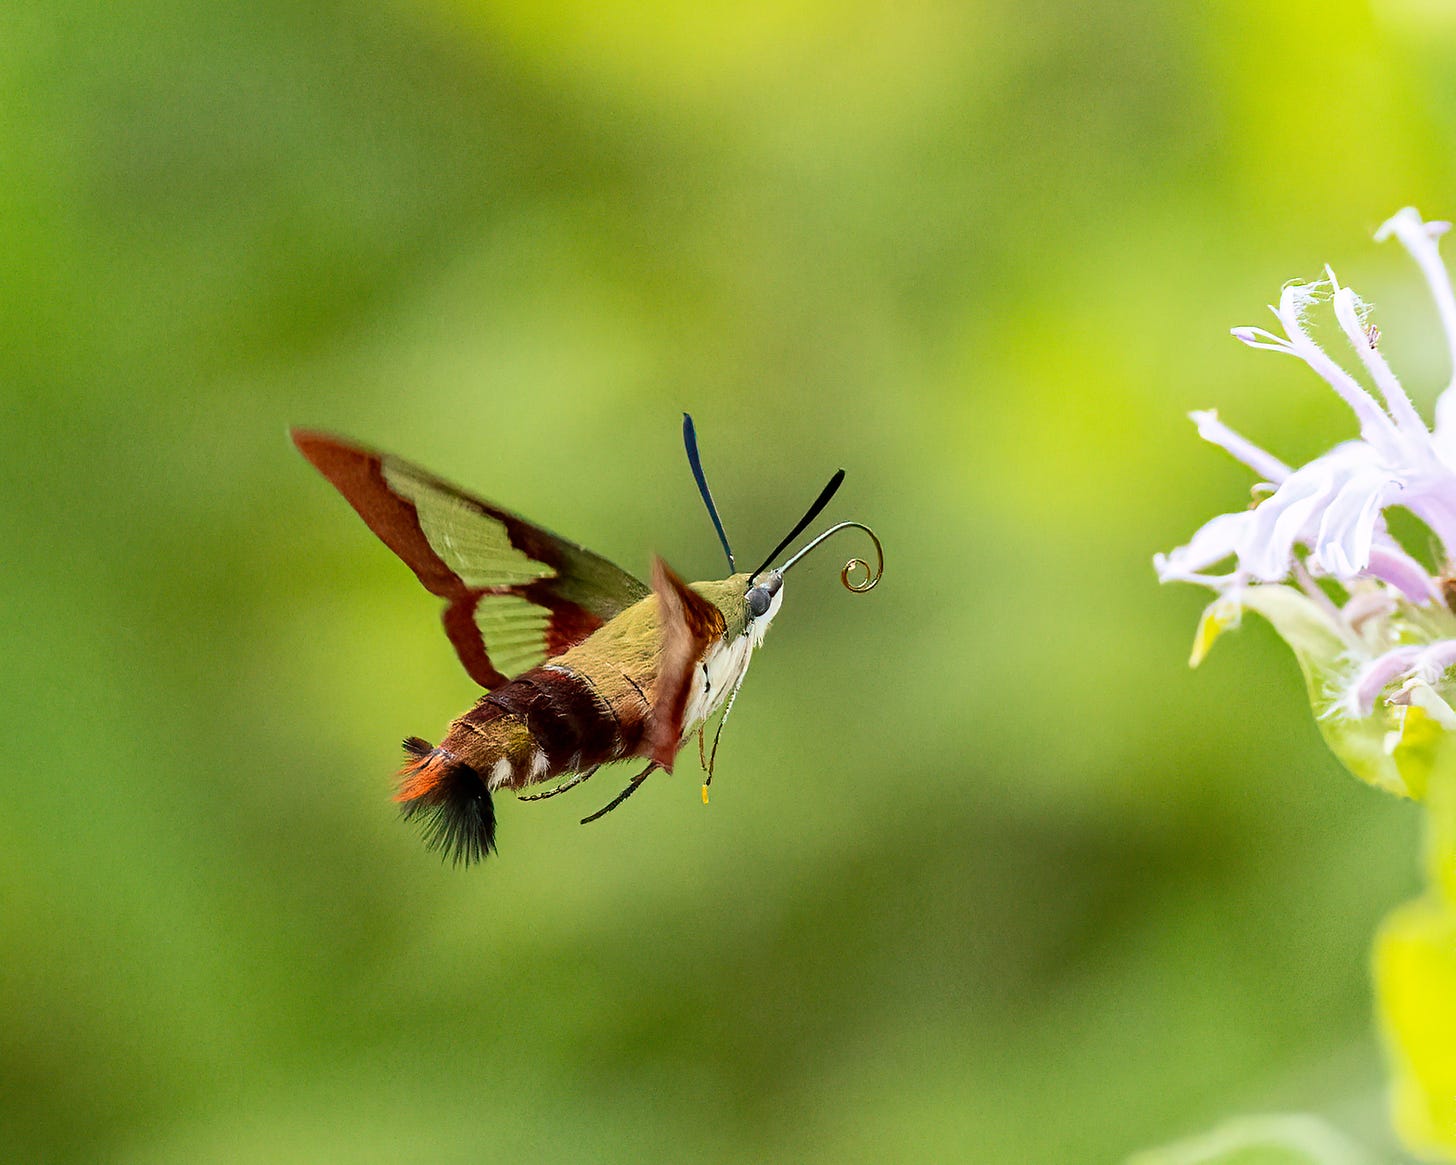 In this series of photos you can see the hummingbird moth heading toward a pink flower for nectar. You can see its tongue sticking out and curled around.